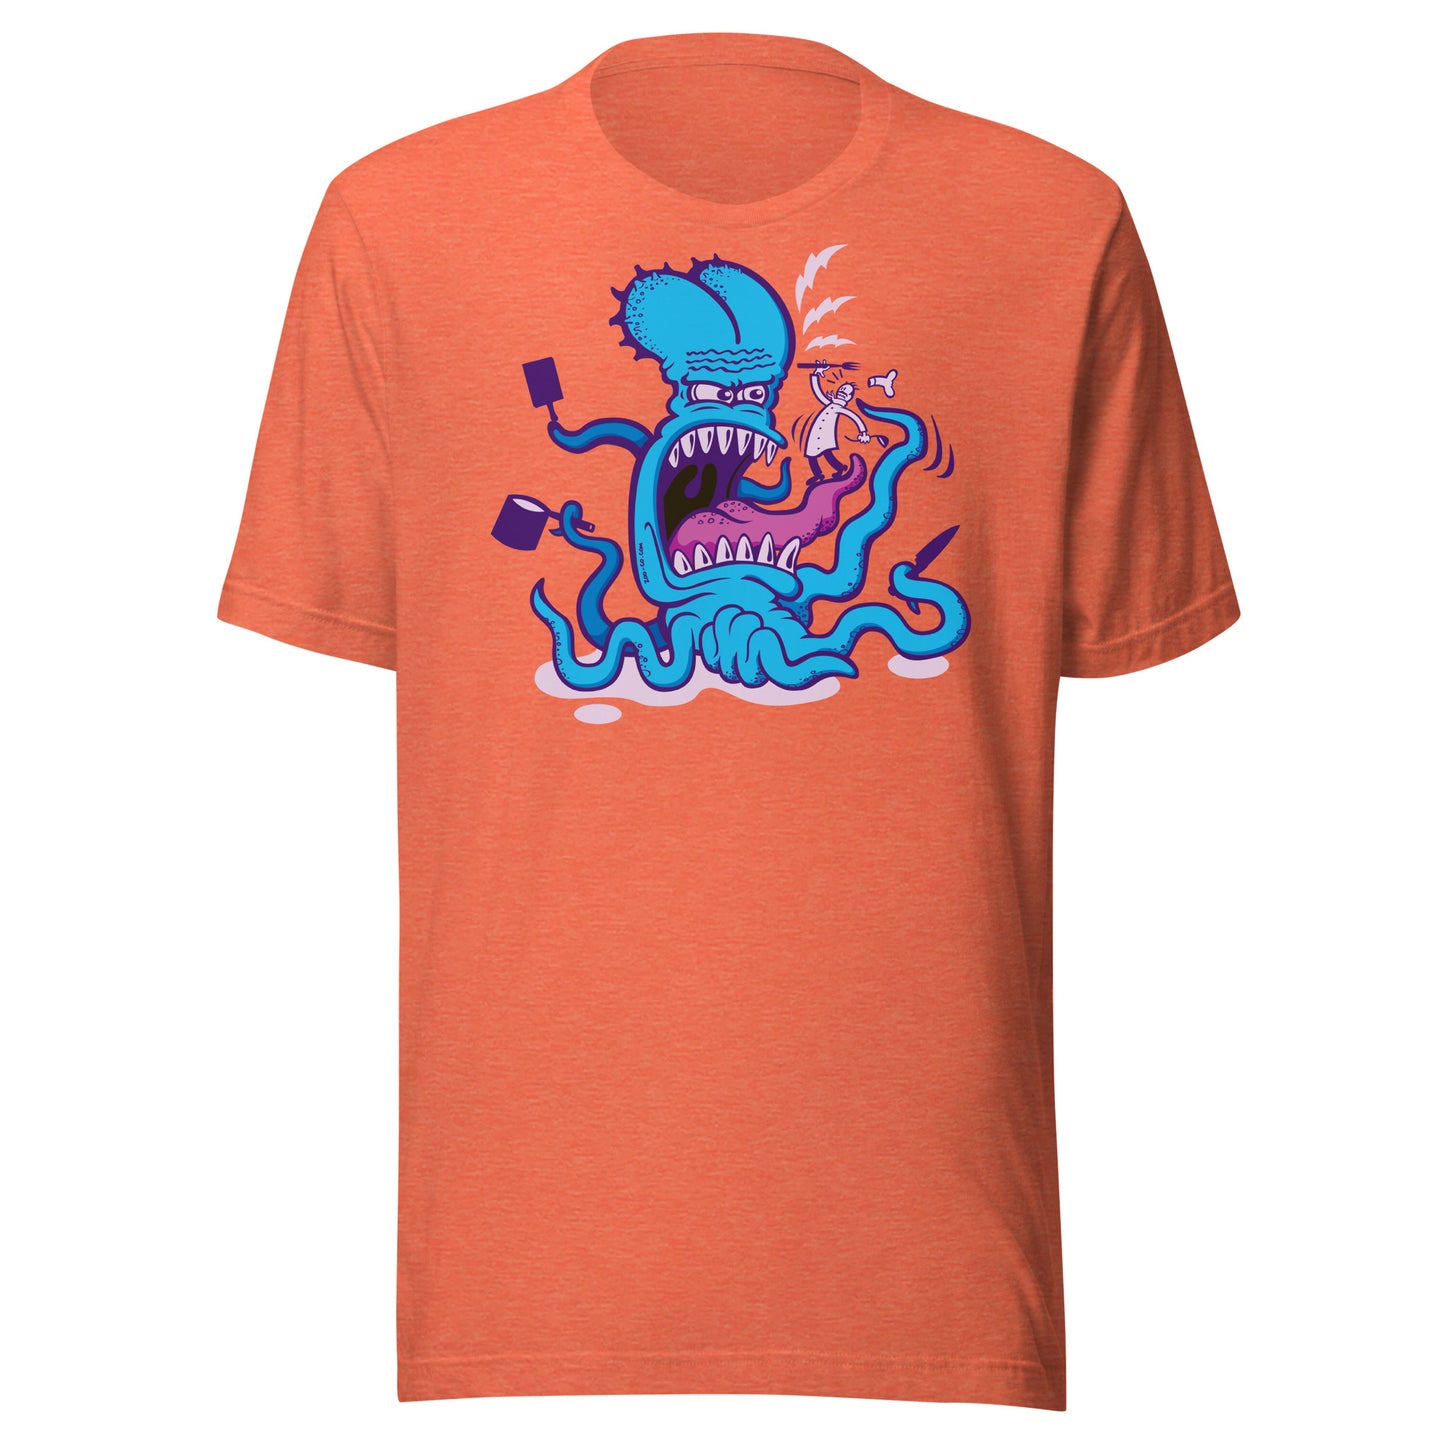 When cooking the perfect octopus recipe becomes extremely dangerous Unisex t-shirt. Heather orange. Front view